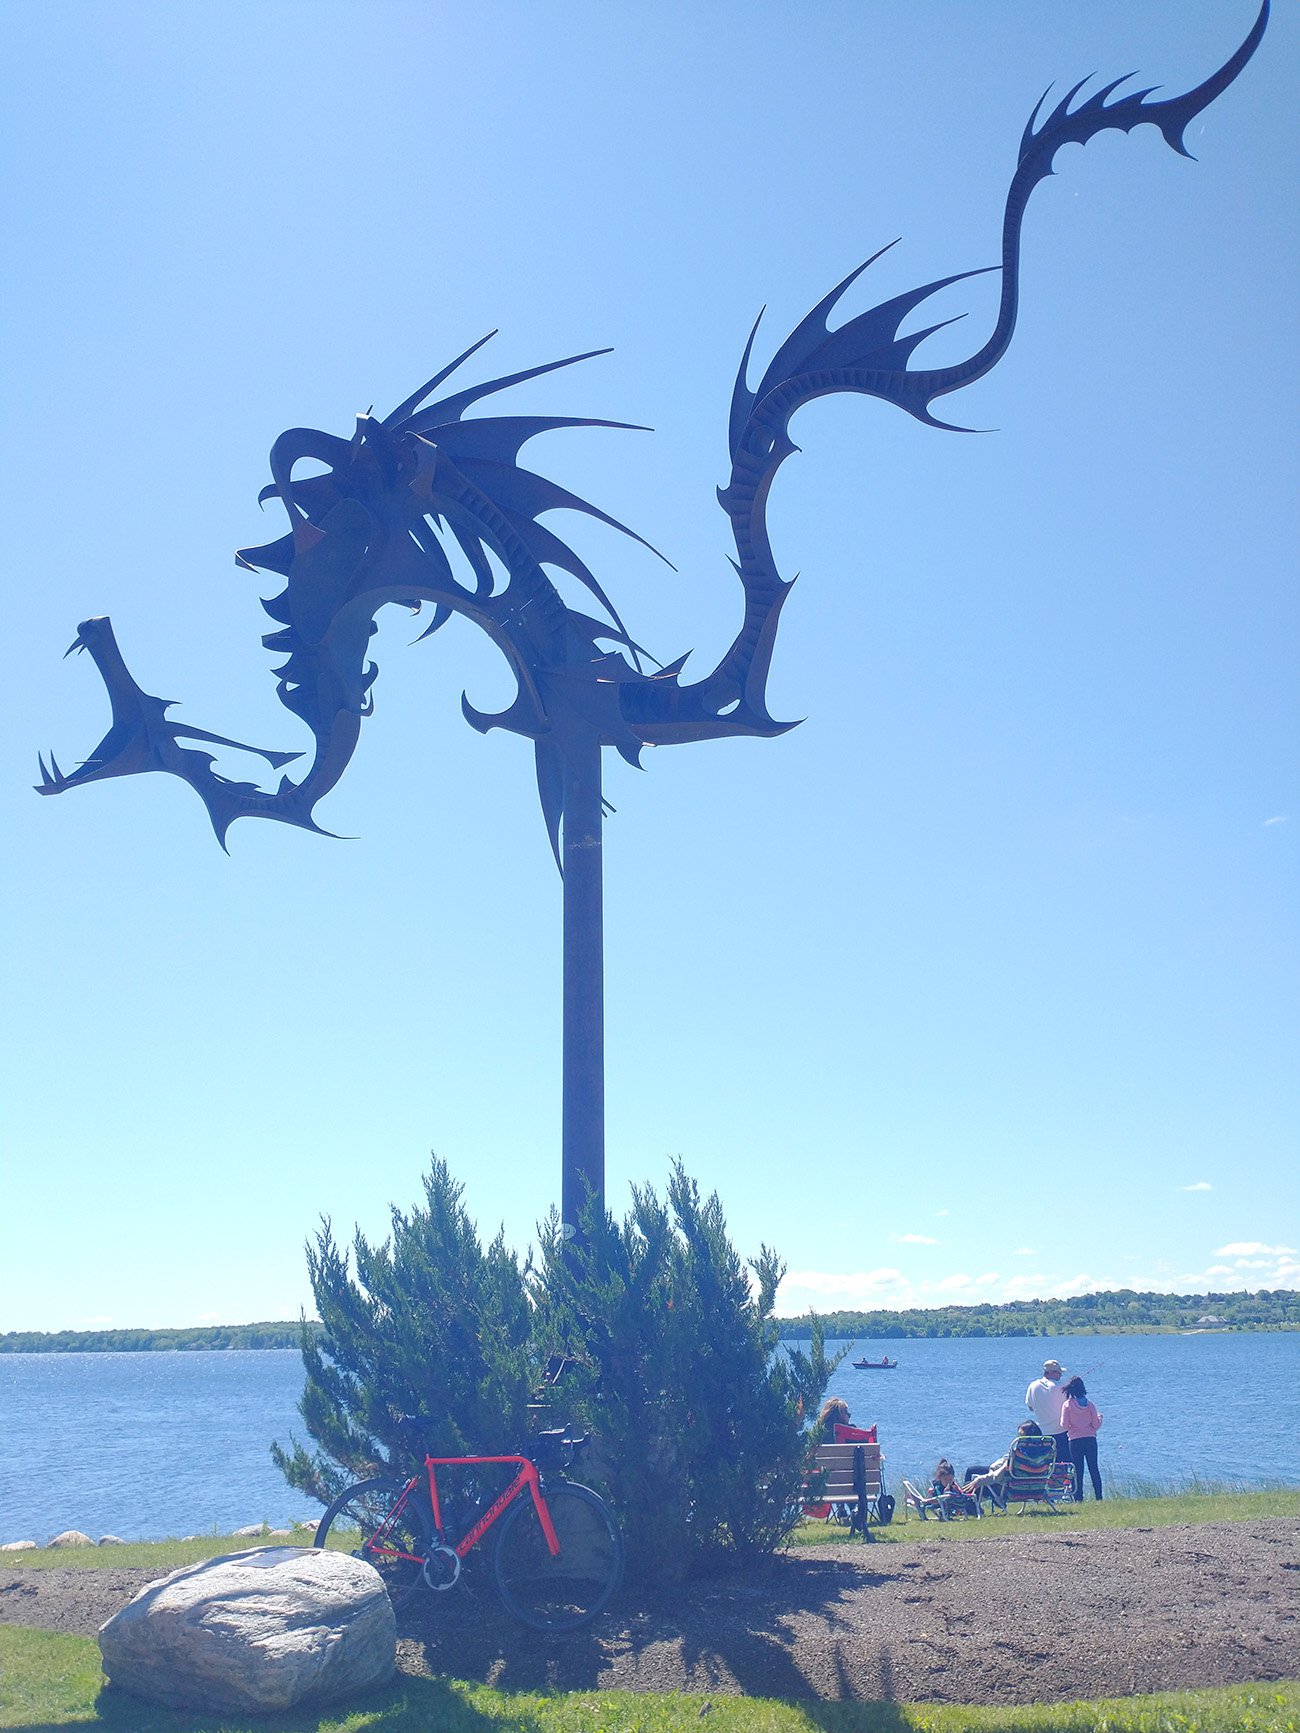 Cool Gyarados statue they have at the Barrie harbor.